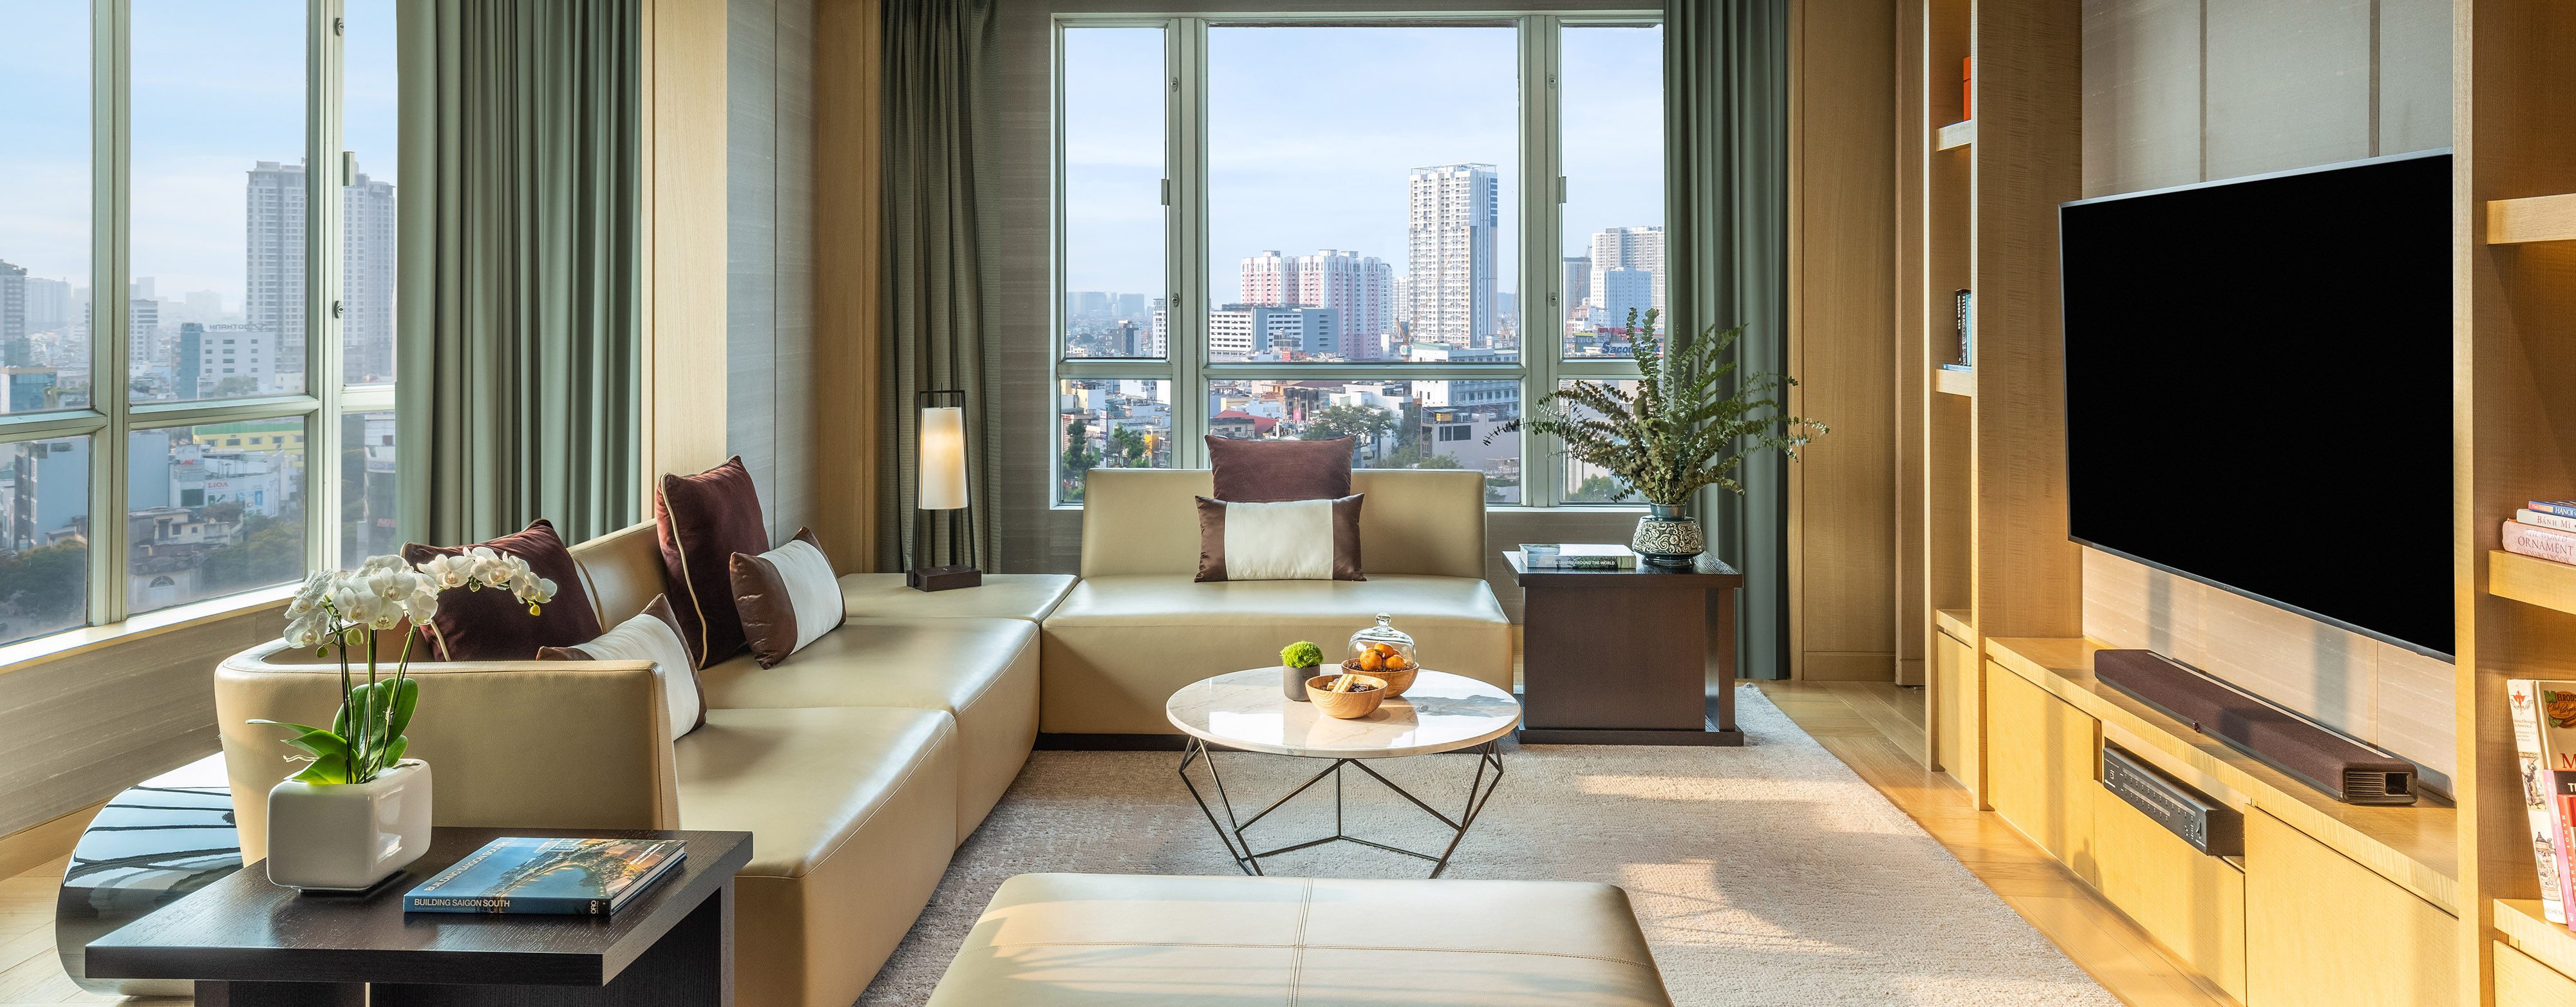 interior of the Presidential Suite living room at the New World Saigon hotel showing comfortable couches across from an entertainment center set in front of large windows with views of Ho Chi Minh City